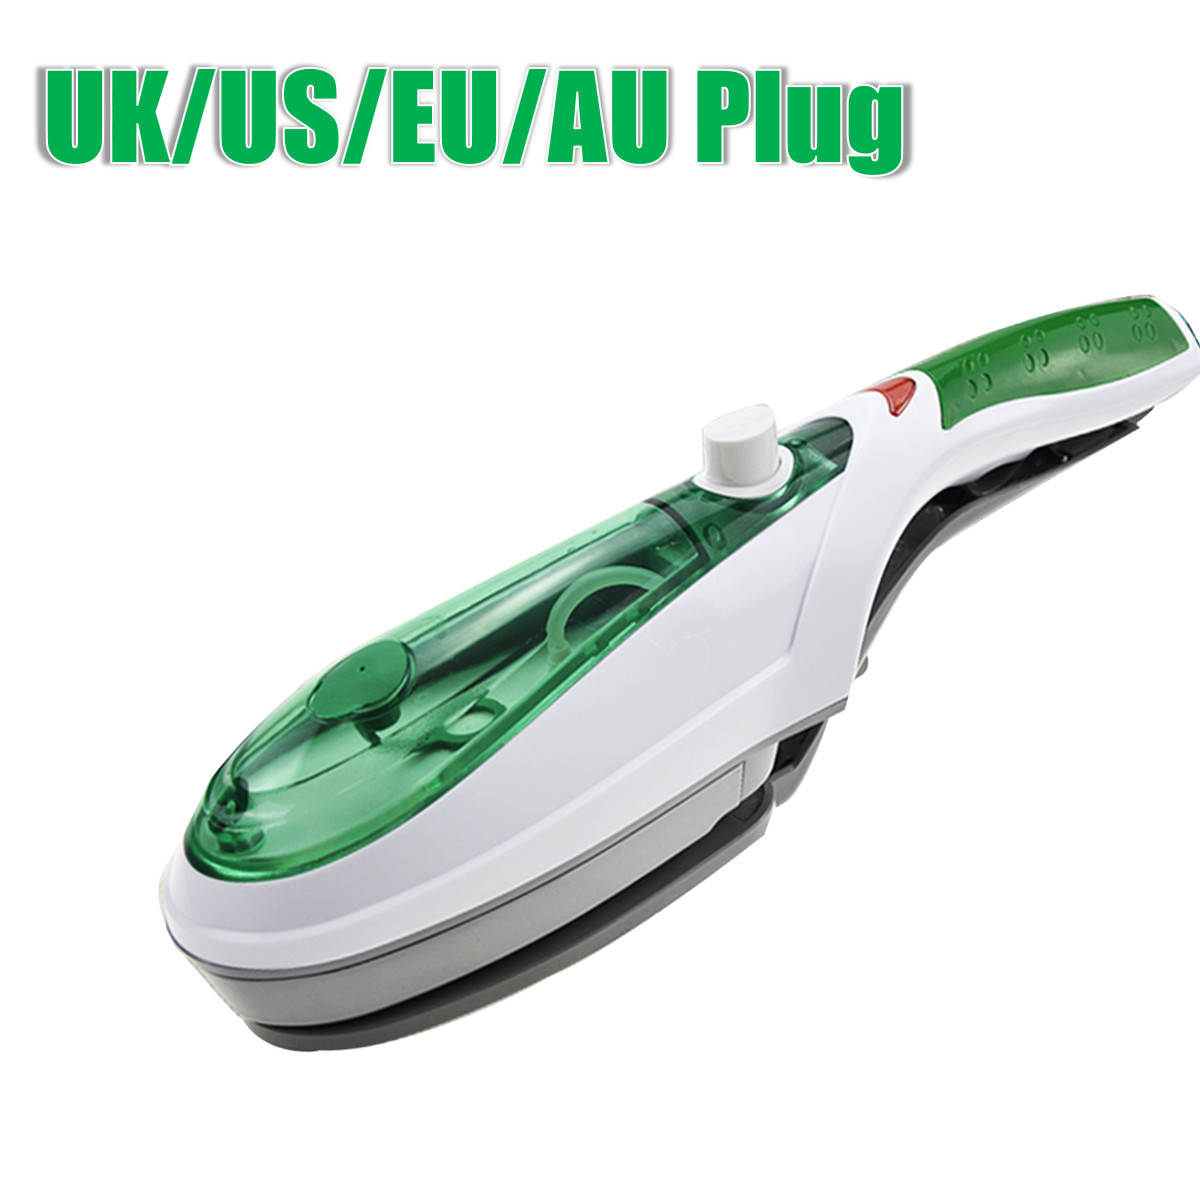 Protable-1000W-Electric-Steam-Iron-Handheld-Fabric-Laundry-Steamer-Brush-Travel-Soldering-Iron-Tips-1589841-3